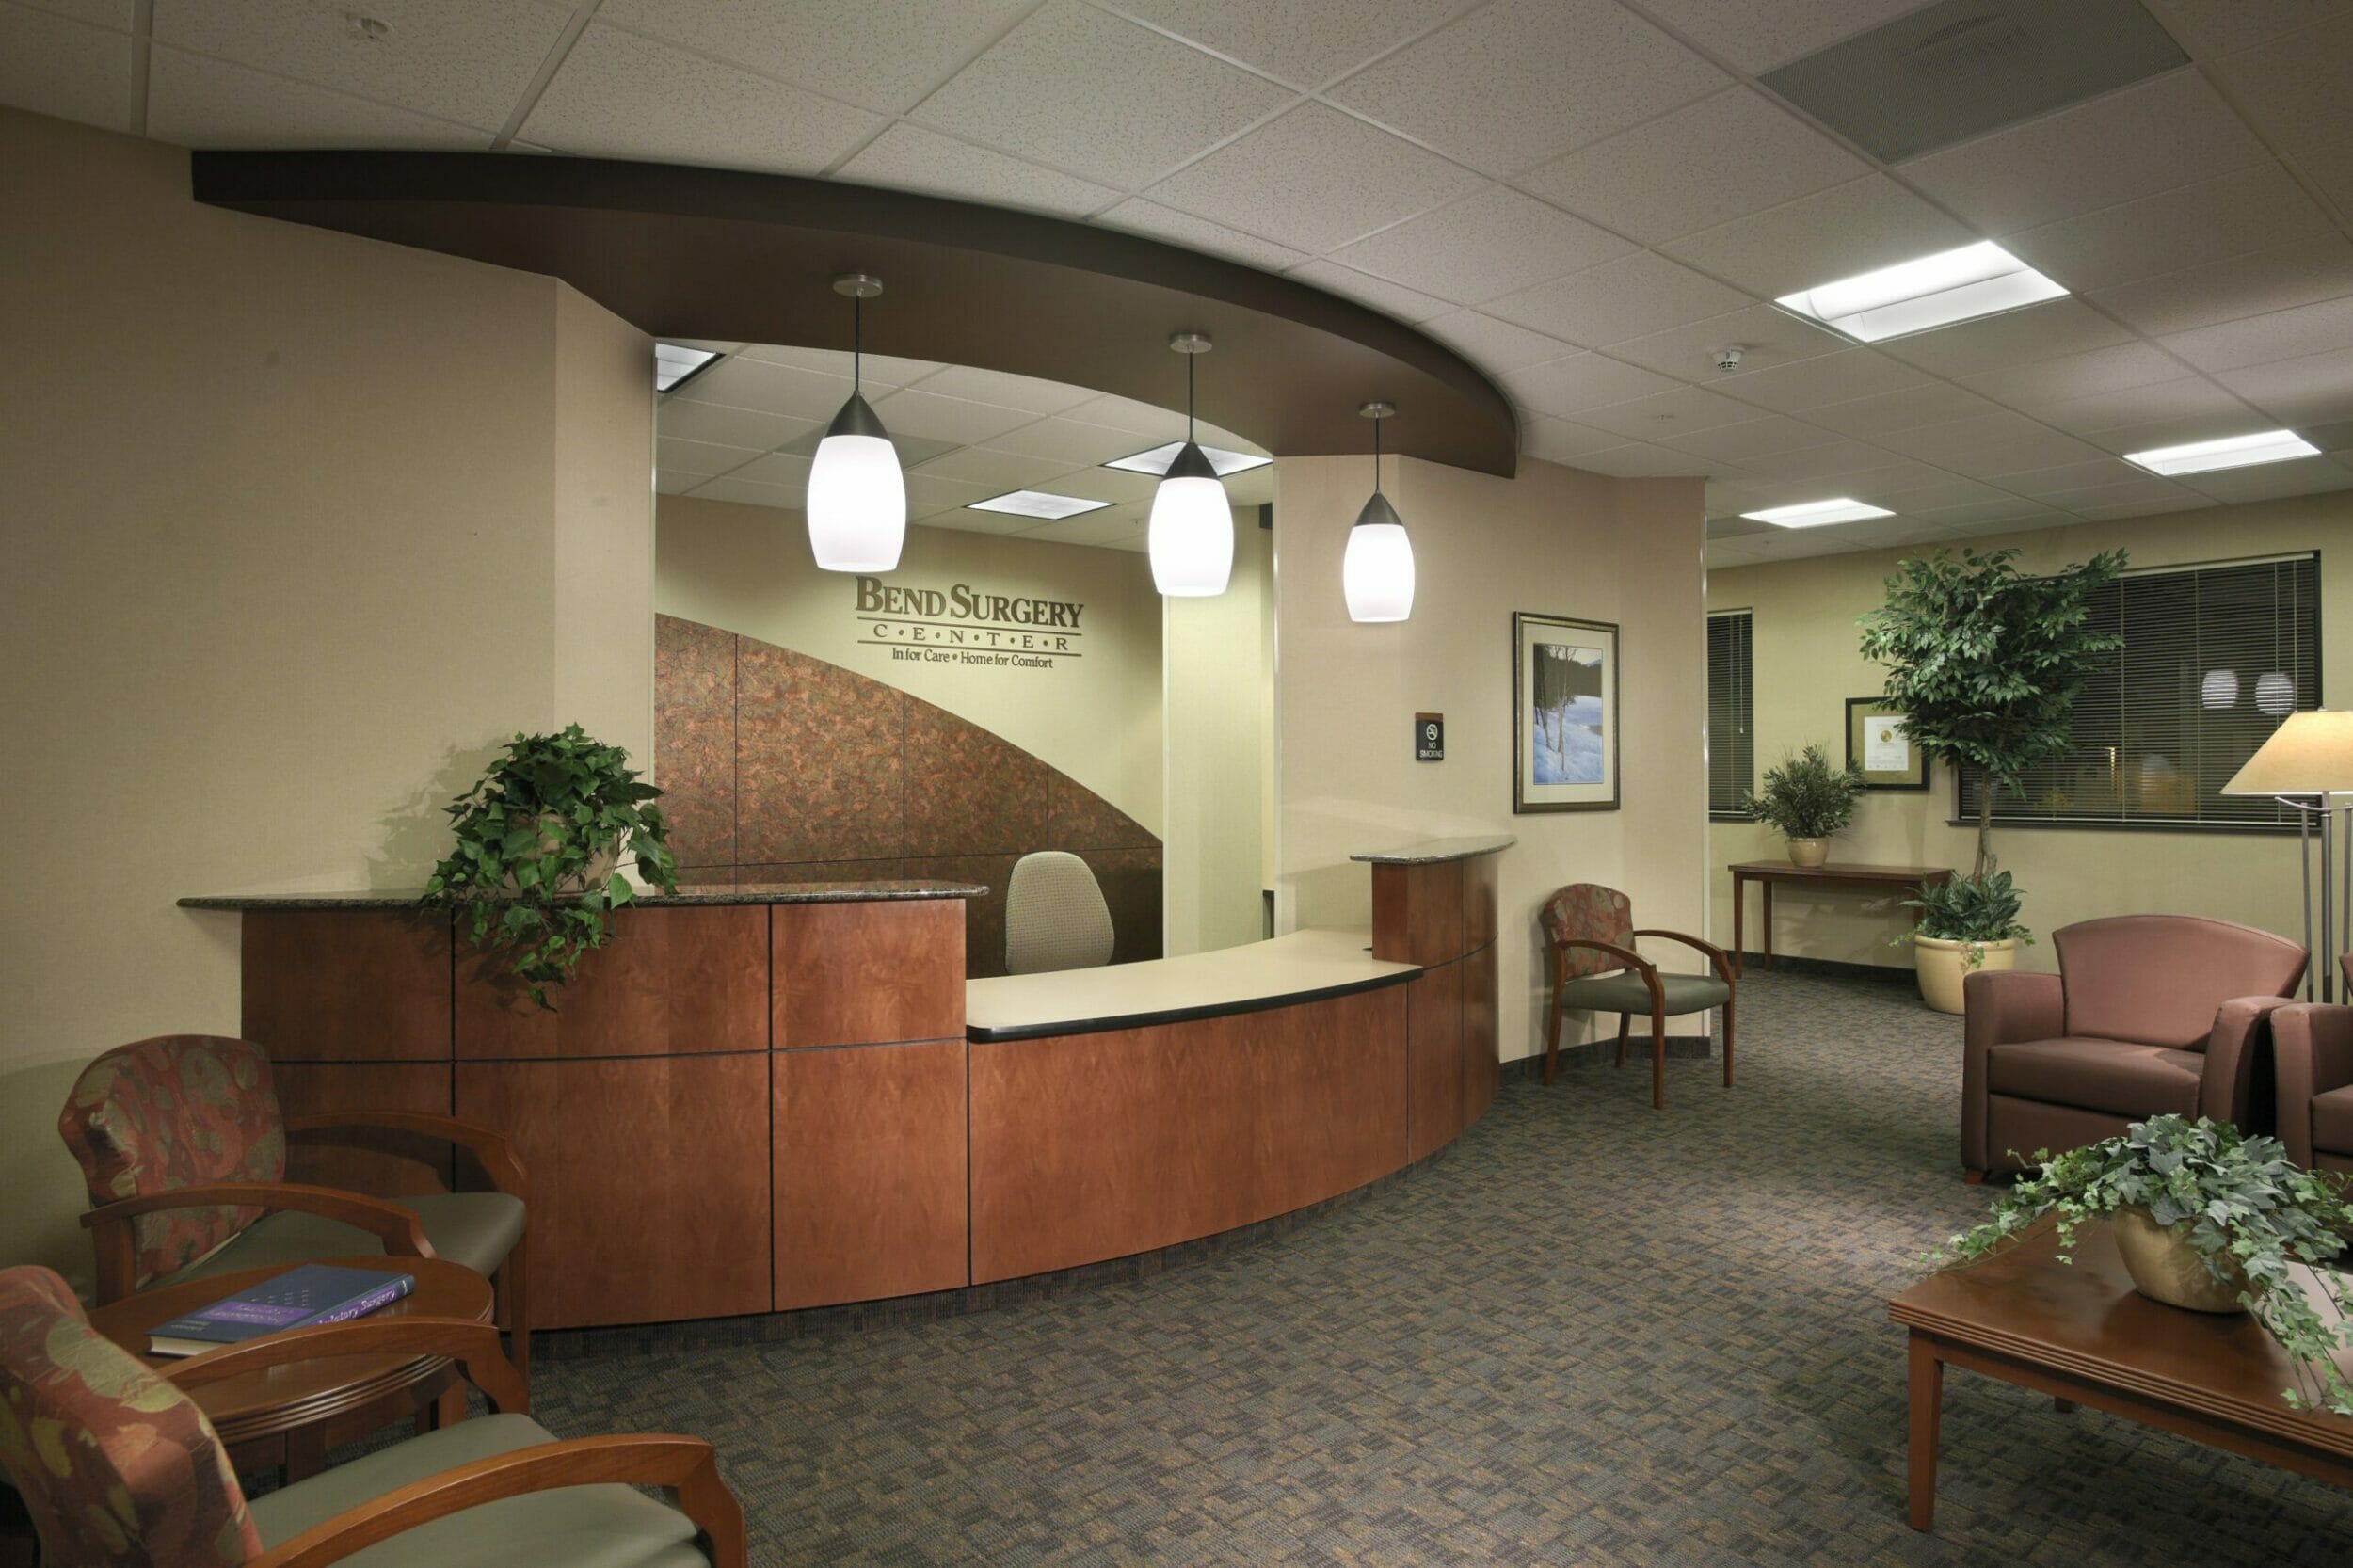 Front desk and lobby inside Bend Surgery Center, with multiple chairs and plants